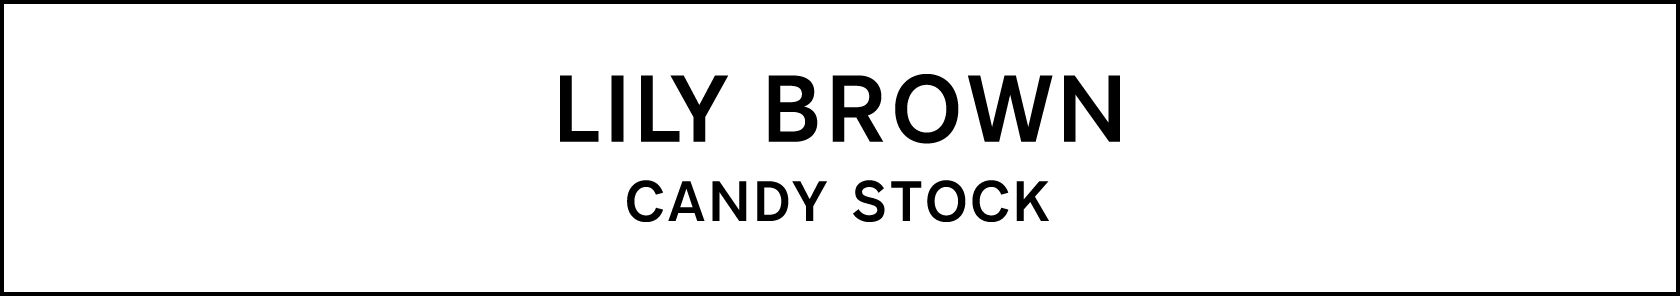 LILY BROWN CANDY STOCK